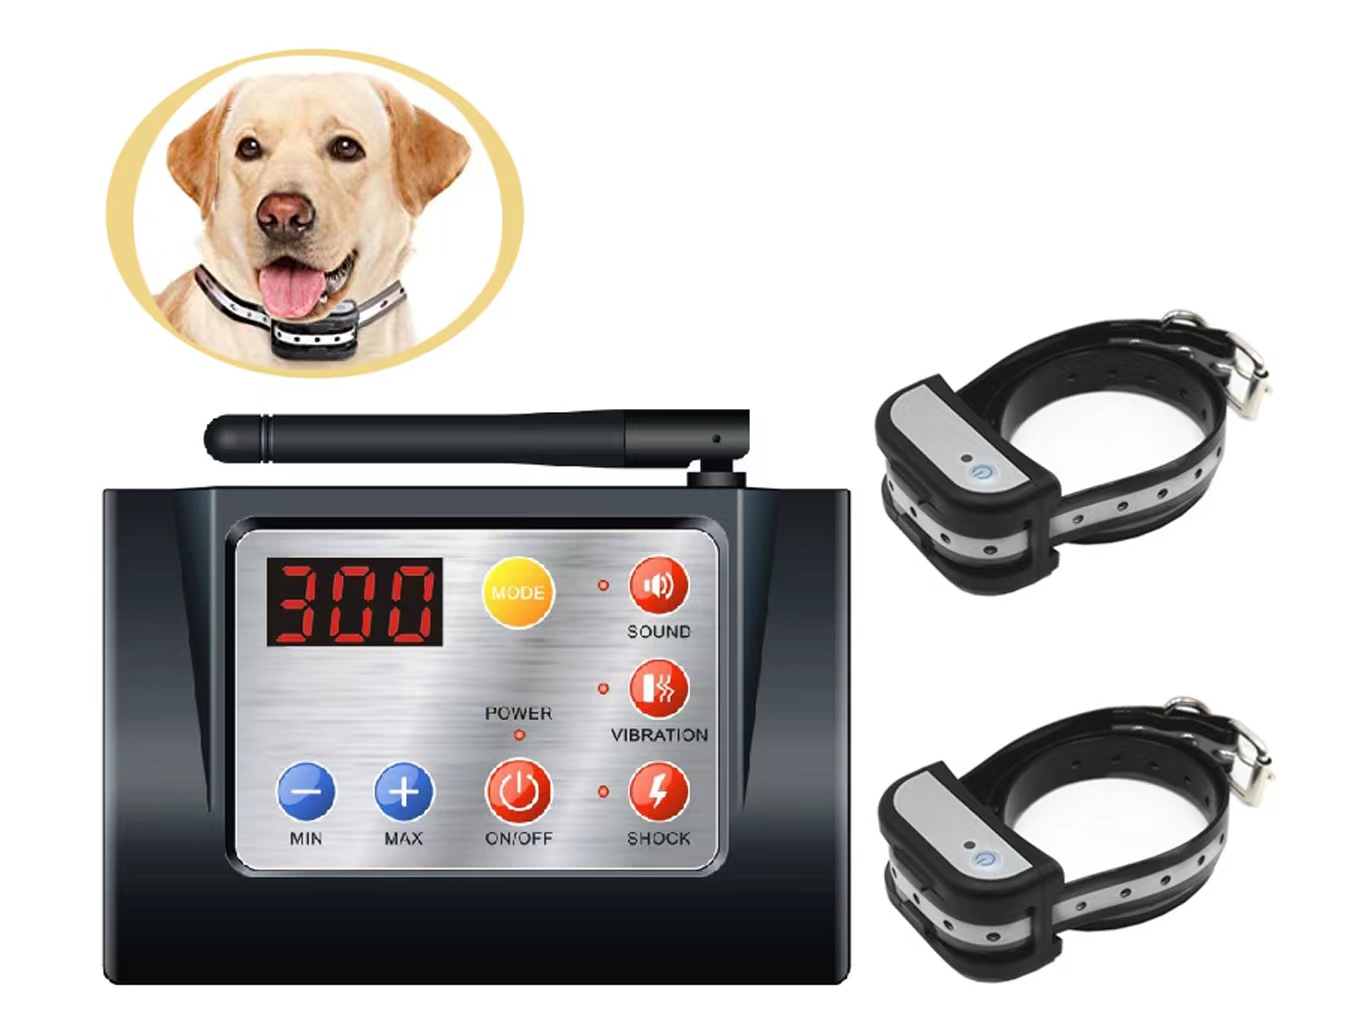 Adjustable Range for 1 Dog Nobranded Dog Wireless Fence pet Fence System Suitable for All pet Dogs Dog Fence System with IP67 Waterproof Dog Training Collar Receiver for 1/2 / 3dogs 